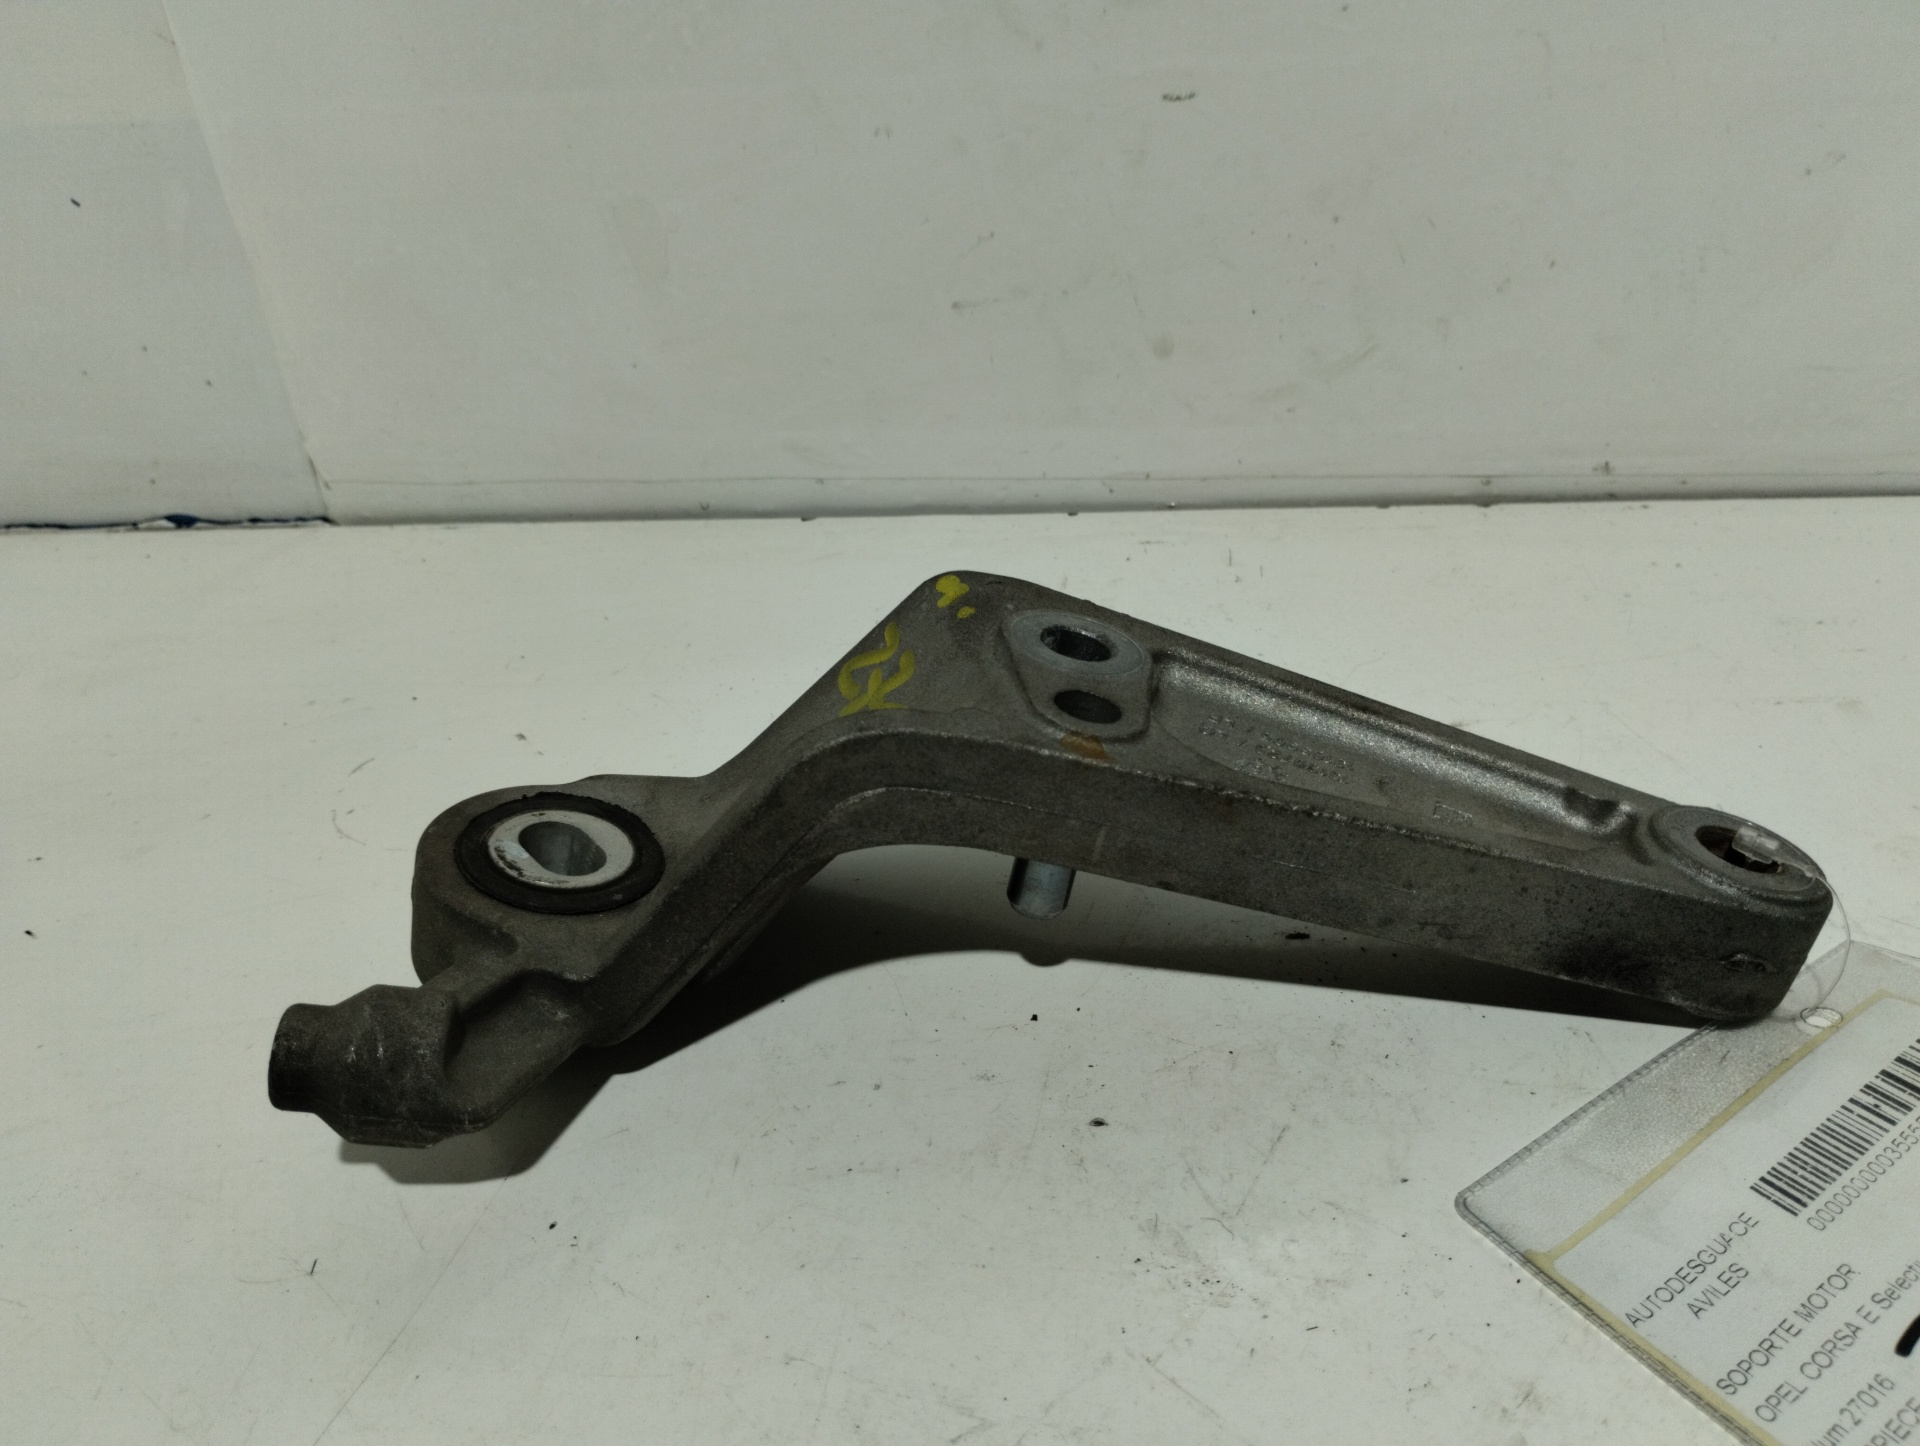 OPEL Corsa D (2006-2020) Other Engine Compartment Parts 13130723 20869713